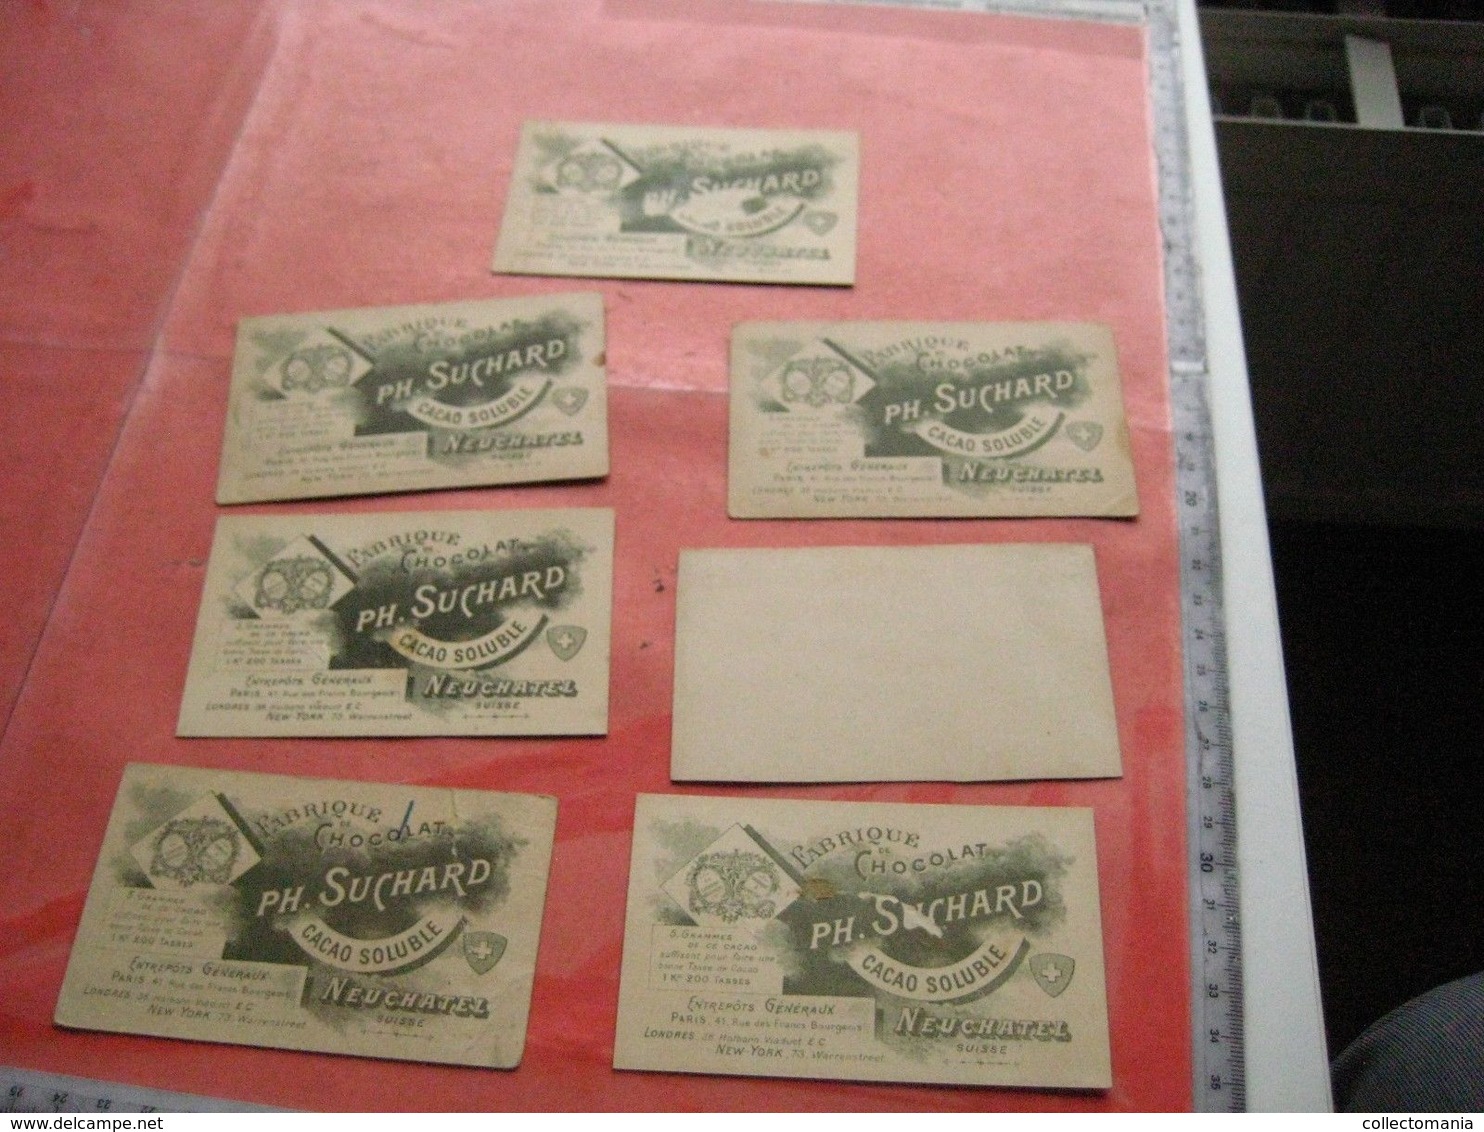 7 Cards Litho C1900 Chocolate SUCHARD Section V Nr 22 - White Part To Be Painted Similar By Child - Views From SUISSE - Collections